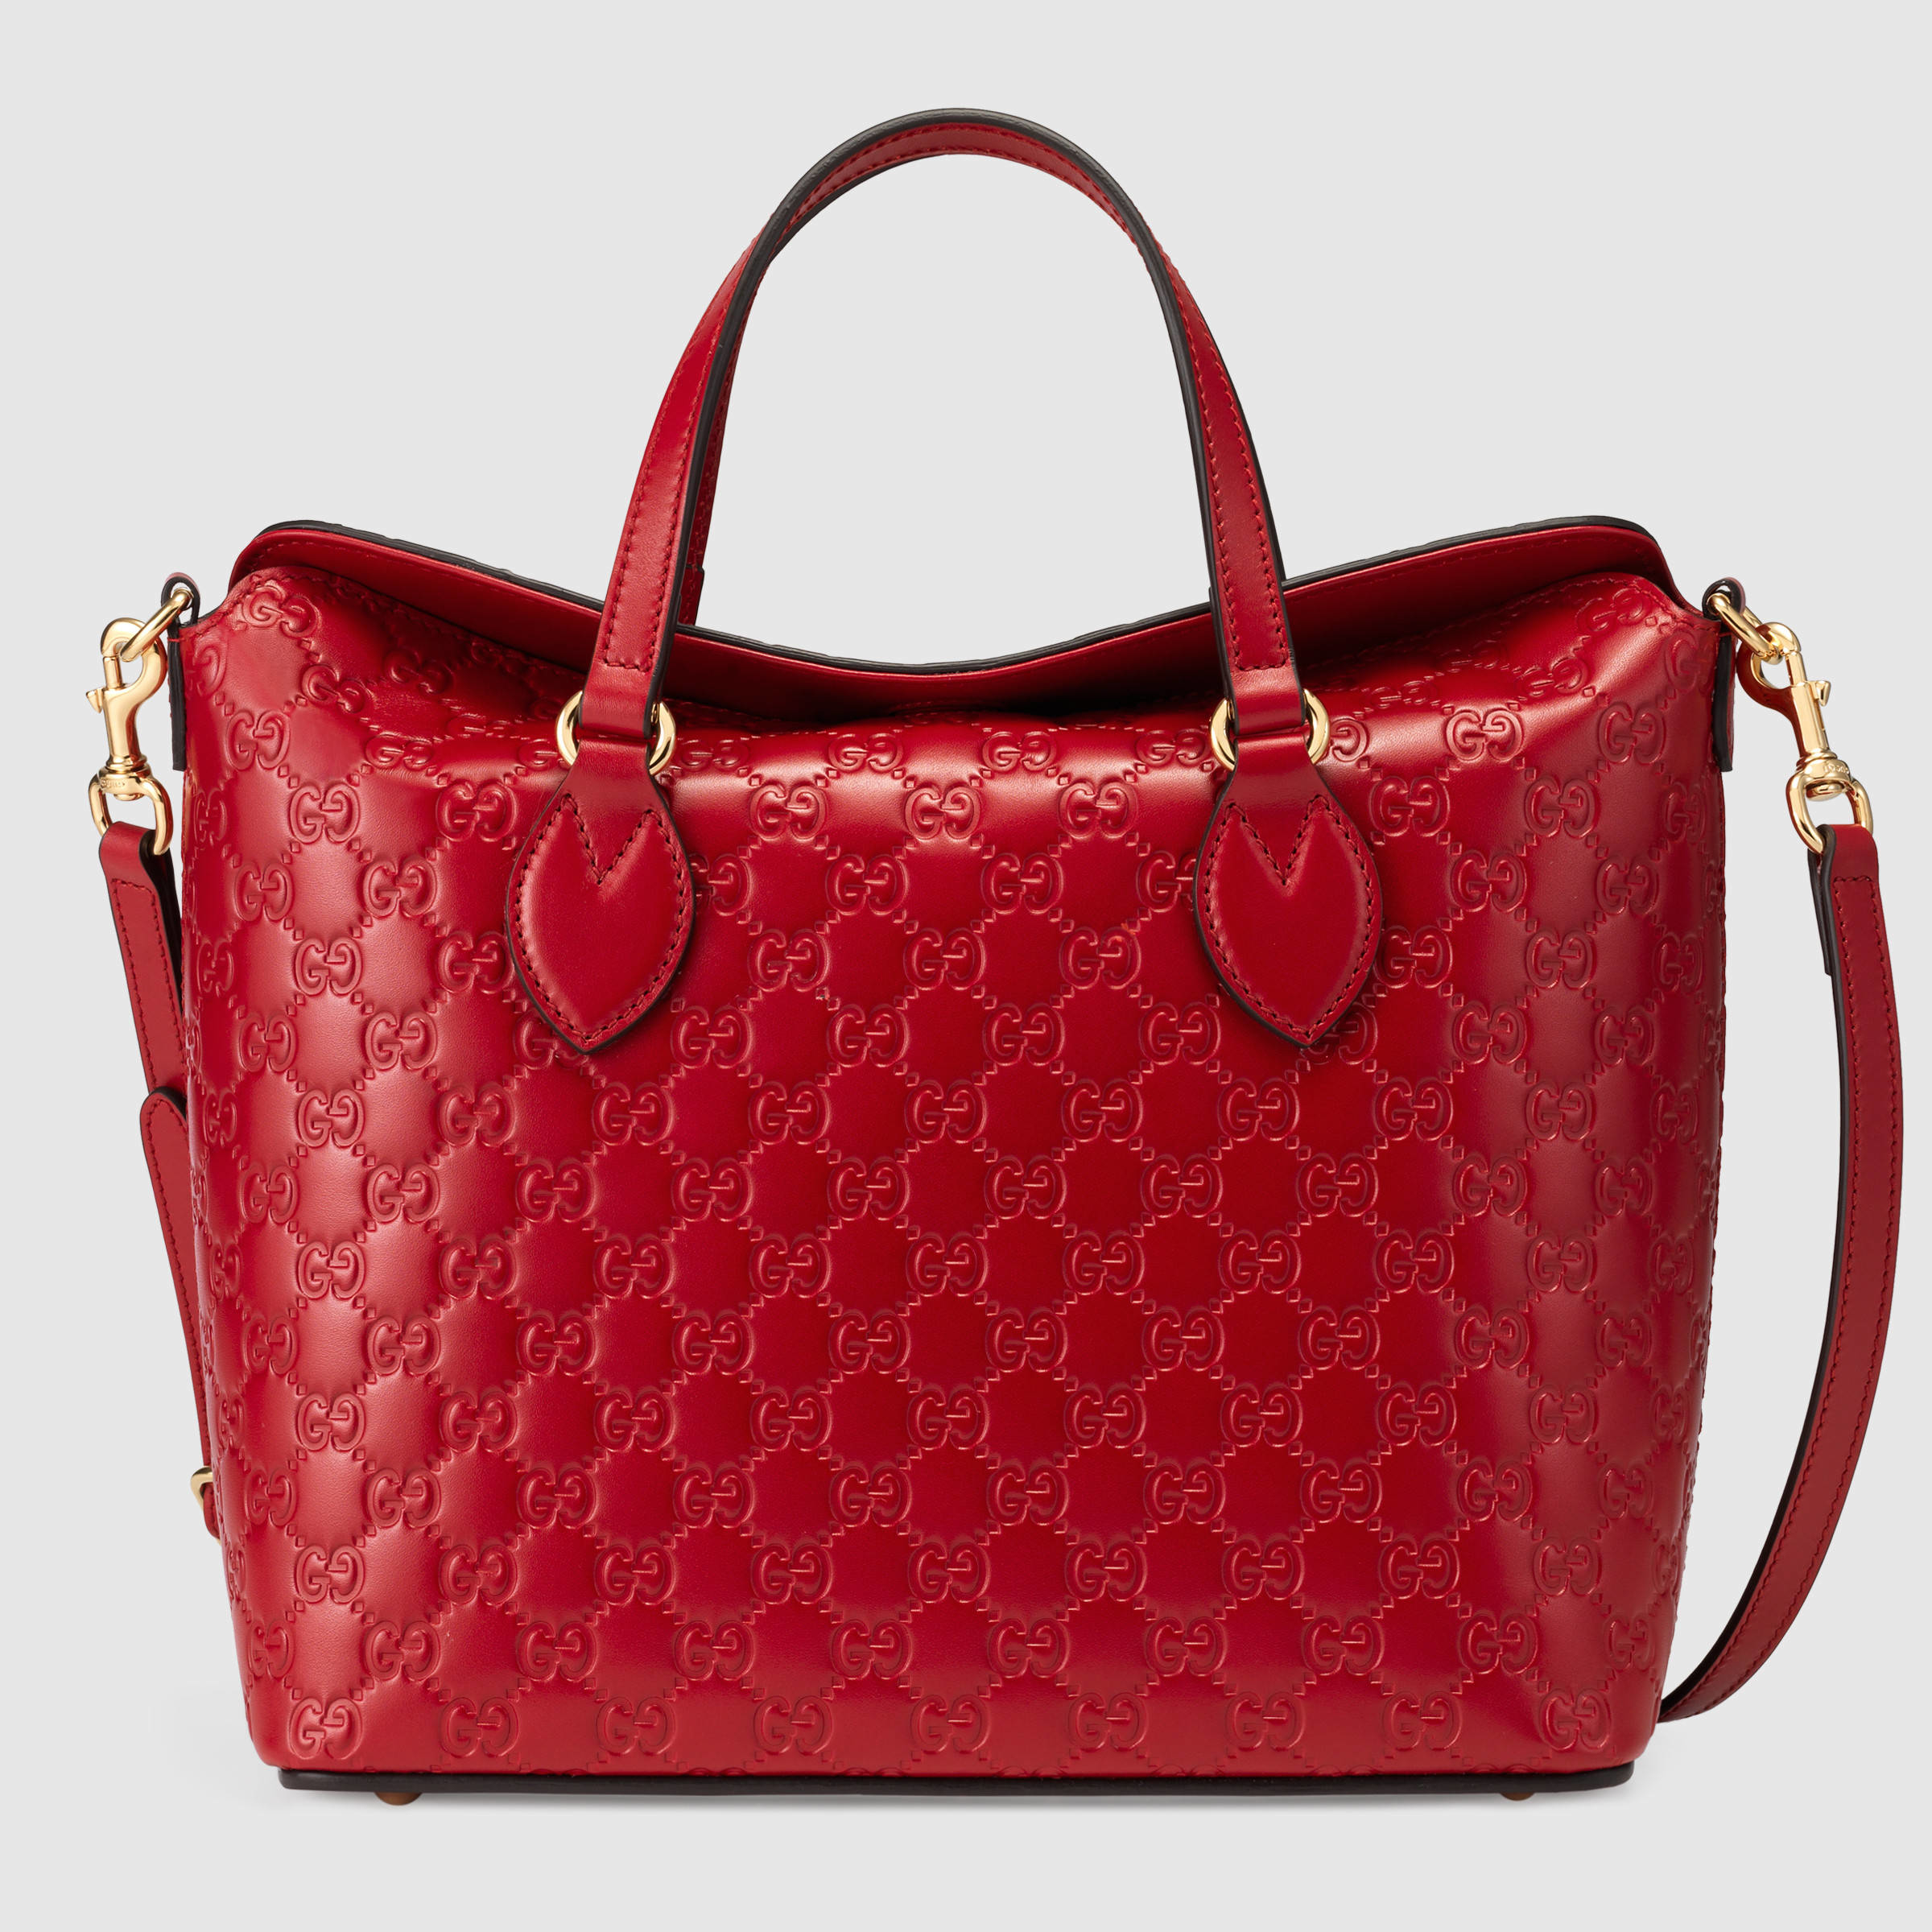 Gucci Signature Leather Top Handle Bag 